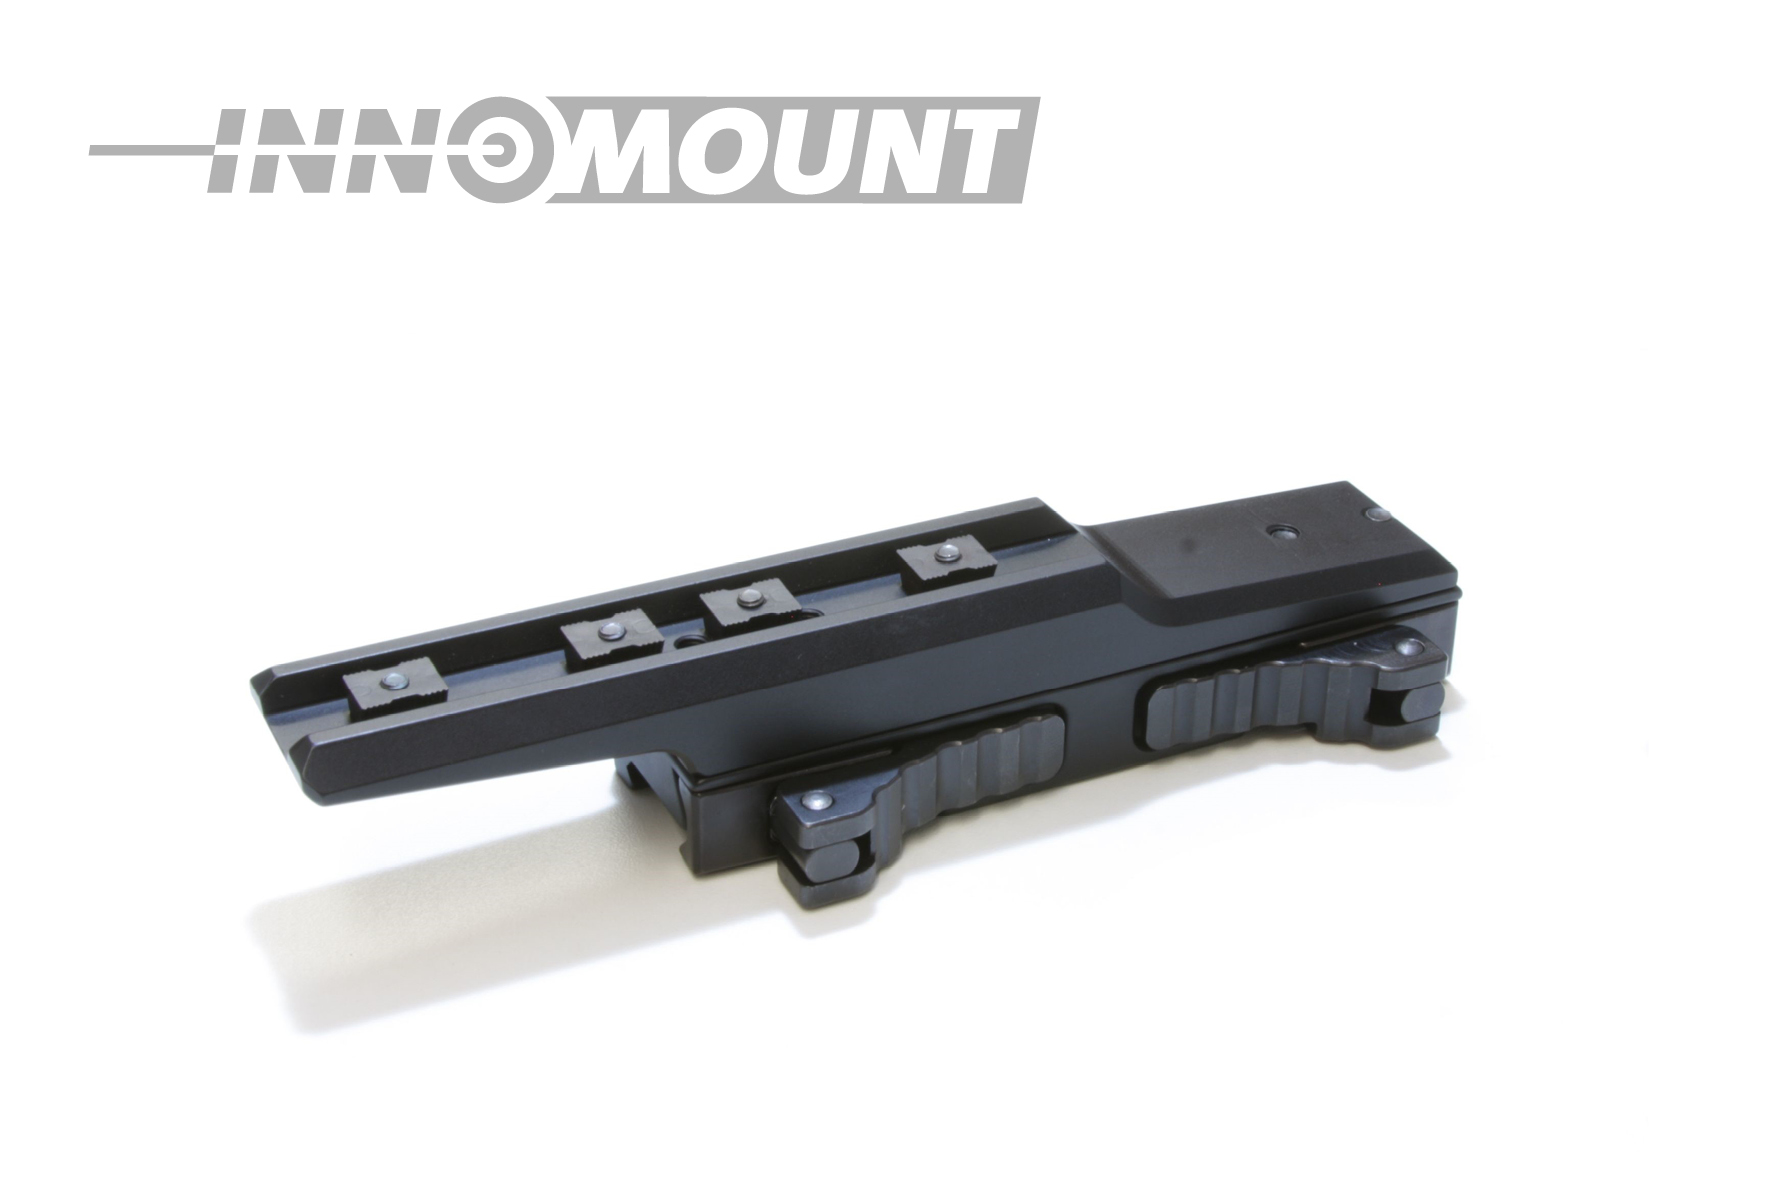 Tactical quick release mounting Flex offset - Zeiss - BH 23mm - 20 MOA